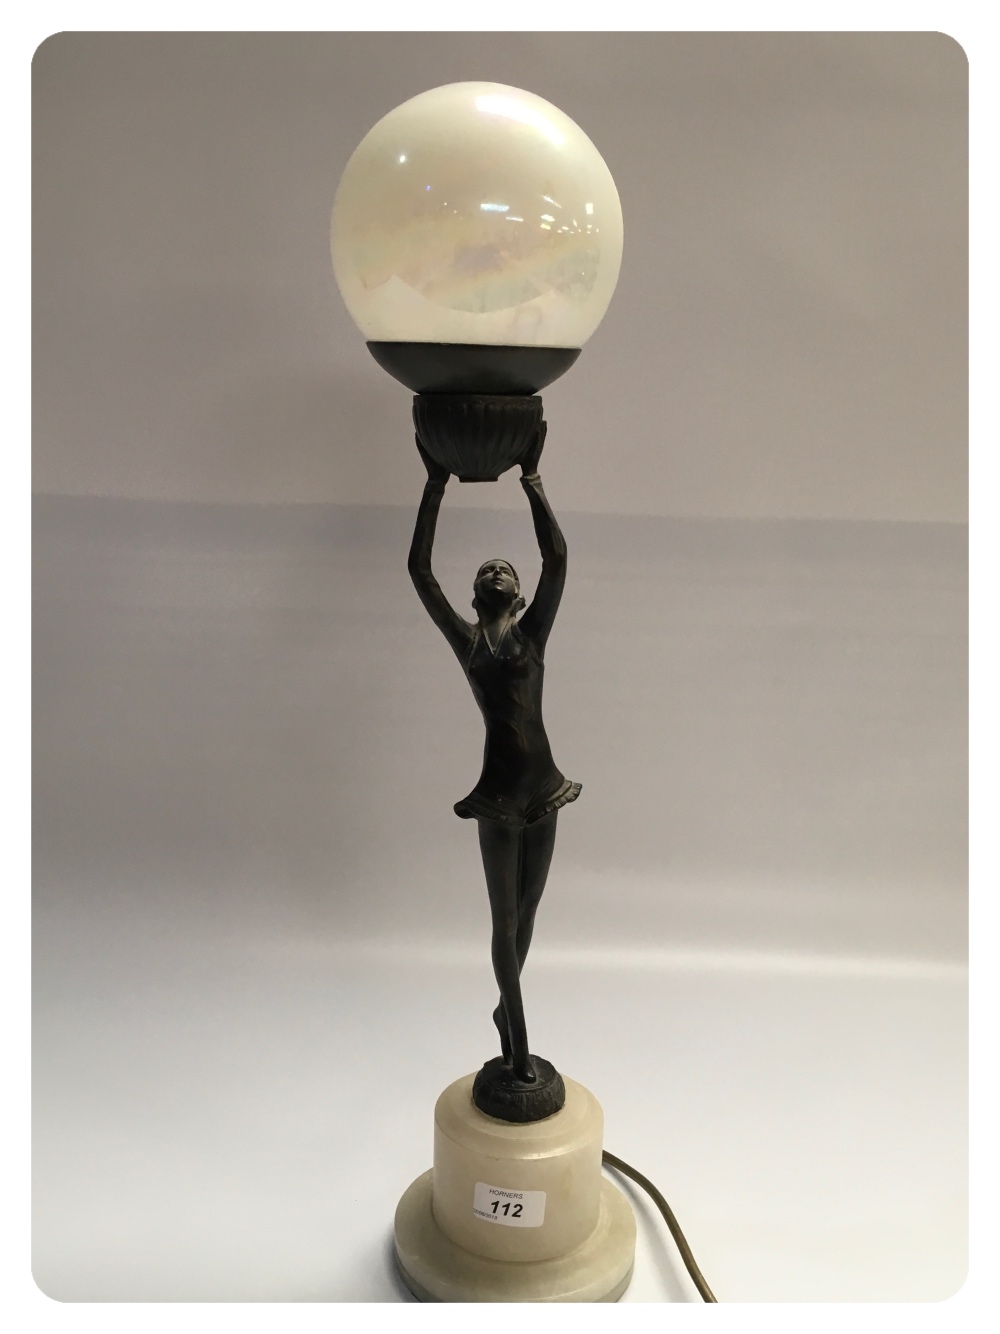 AN ART DEOC LAMP FIGURED ON A DANCER HOL - Image 2 of 4